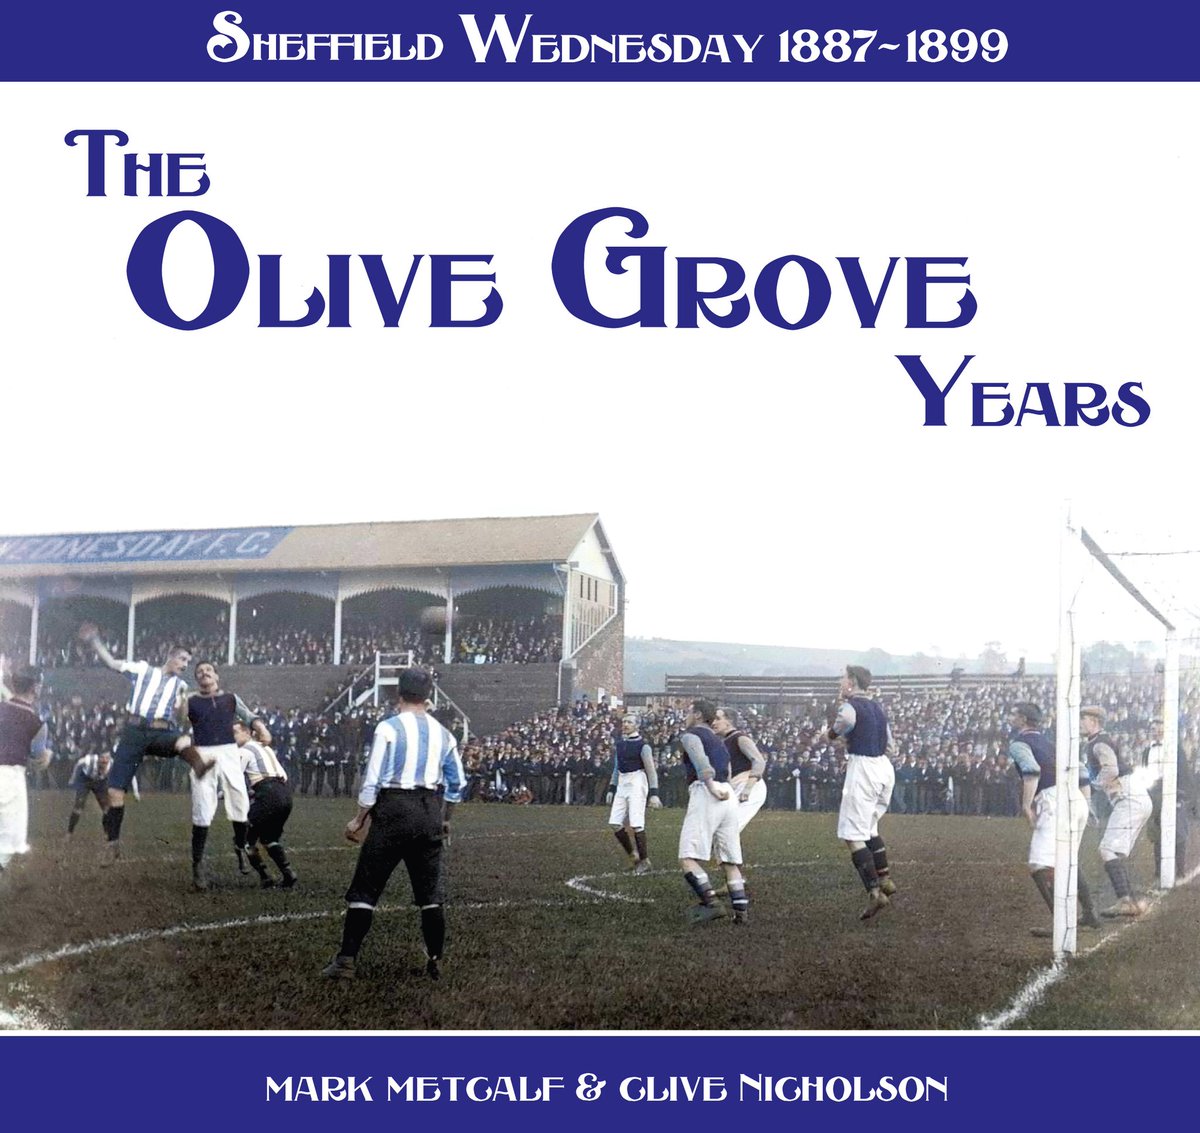 Out on 15 April, the 125th anniversary of the last match at the famous old ground. Possibly this book, which follows the earlier images one from 2017, makes it the most researched ground to date from the Victorian era.